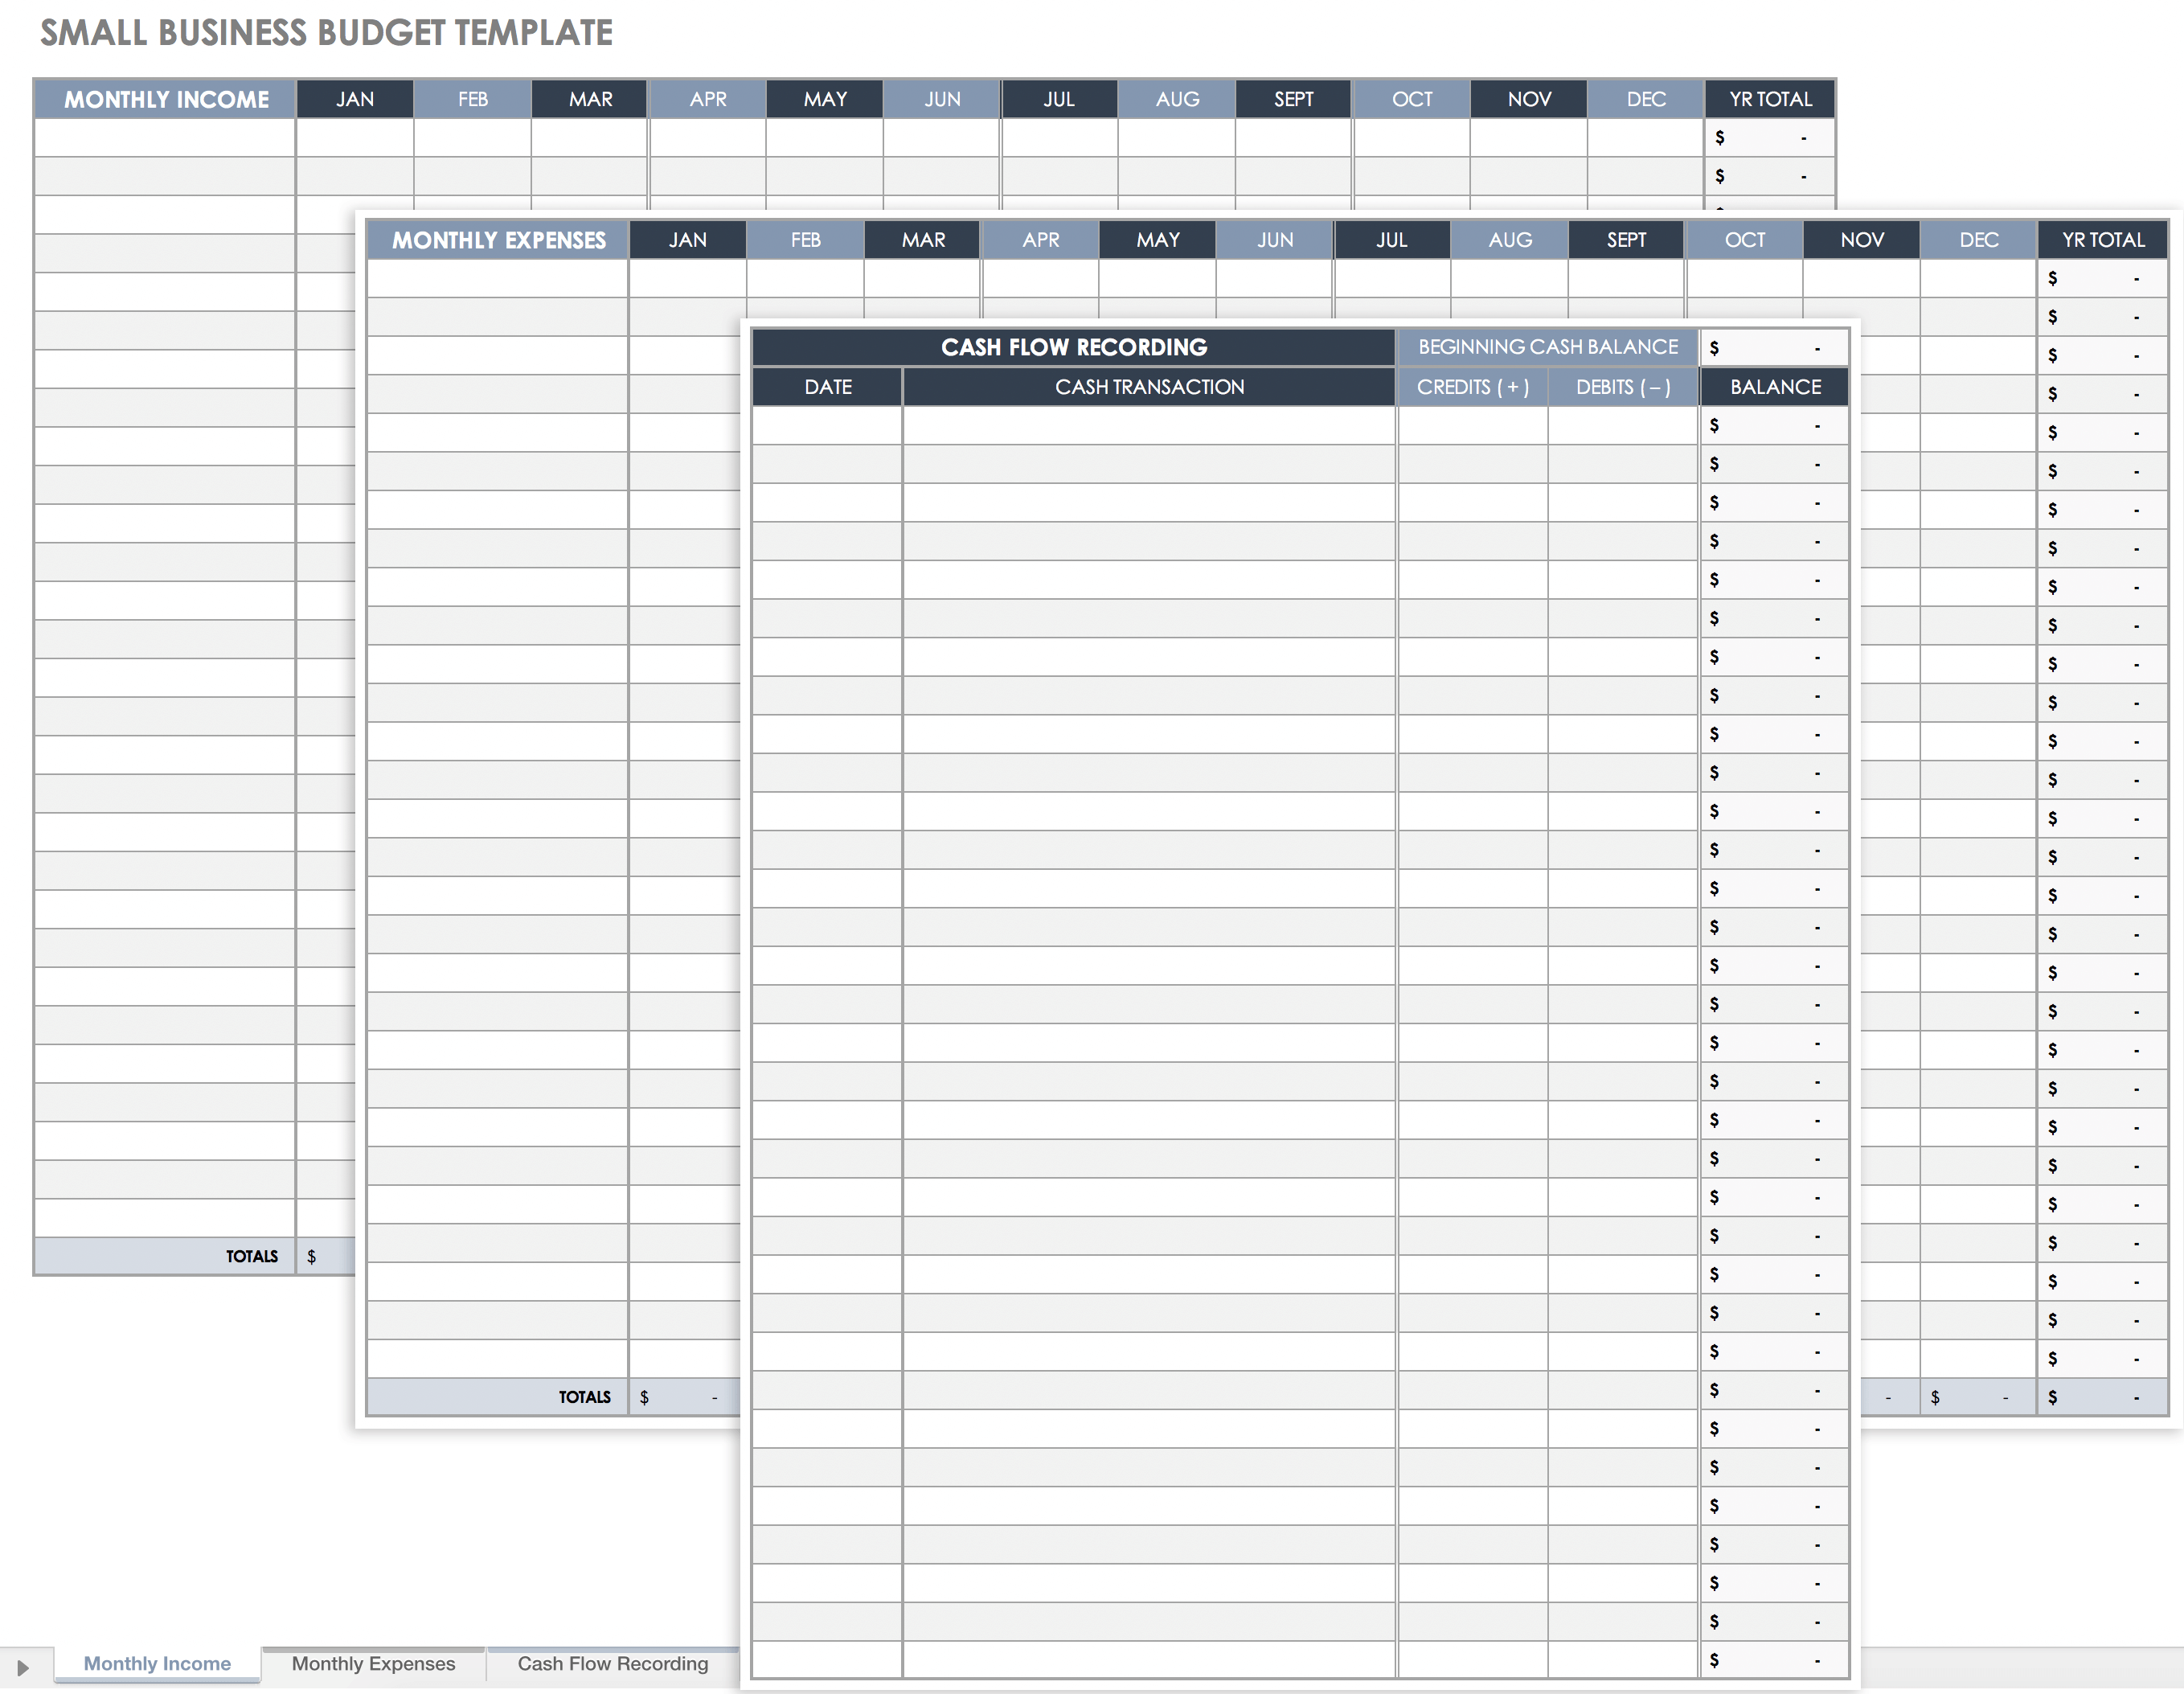 Free Small Business Budget Templates  Smartsheet Inside Single Person Budget Template With Single Person Budget Template